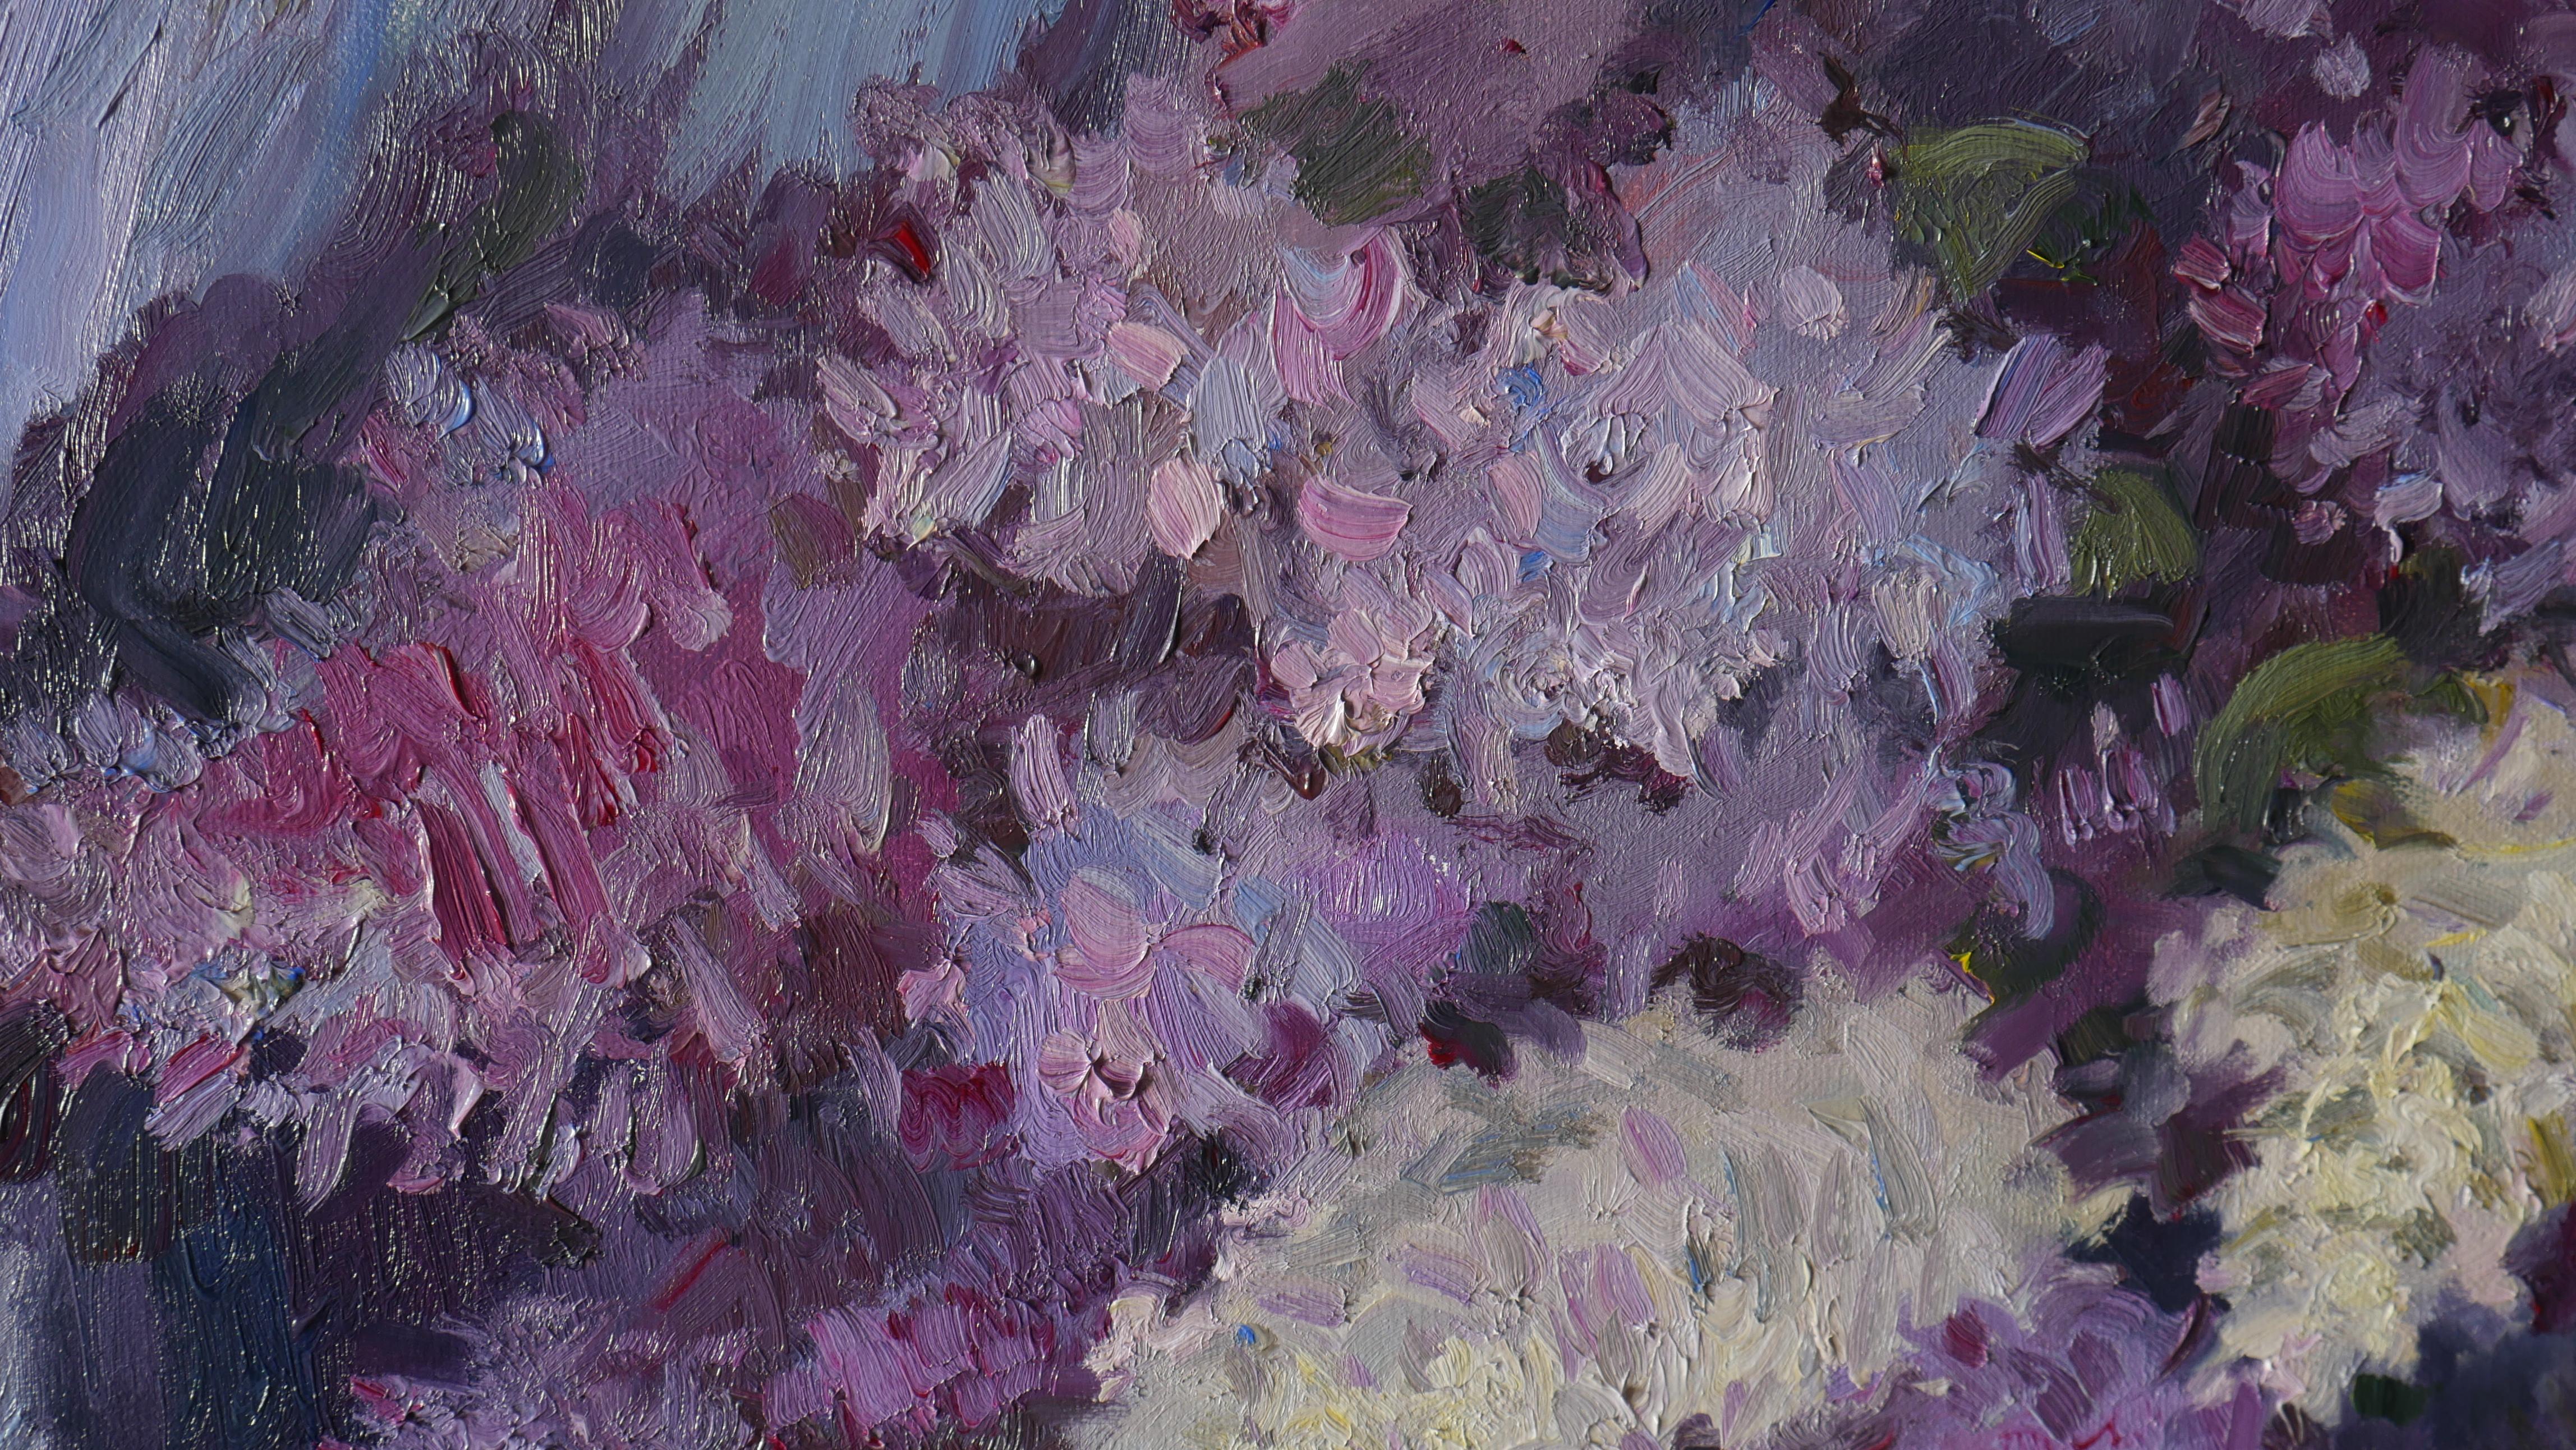 The night still life with a bouquet of lilacs will become a remarkable and modern home decoration, blooming lilacs branches always decorates any house interior, the impressionistic artwork is created in purple colours. Lilacs are favourite floral